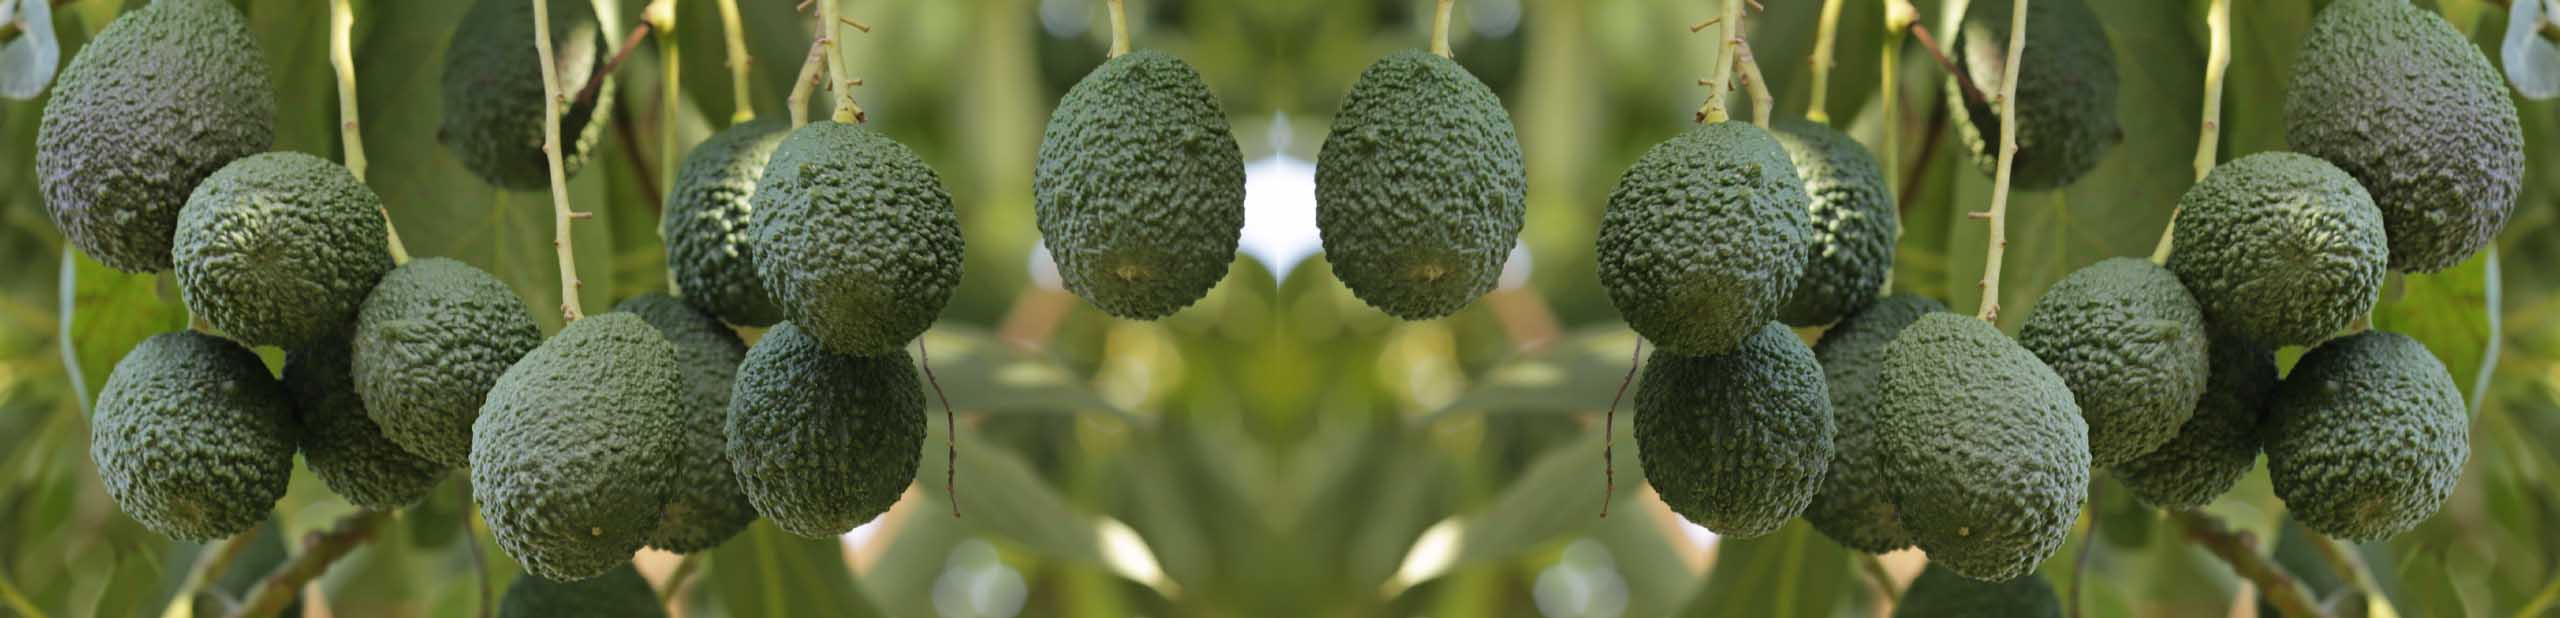 Green avocado fruits hanging from the tree.